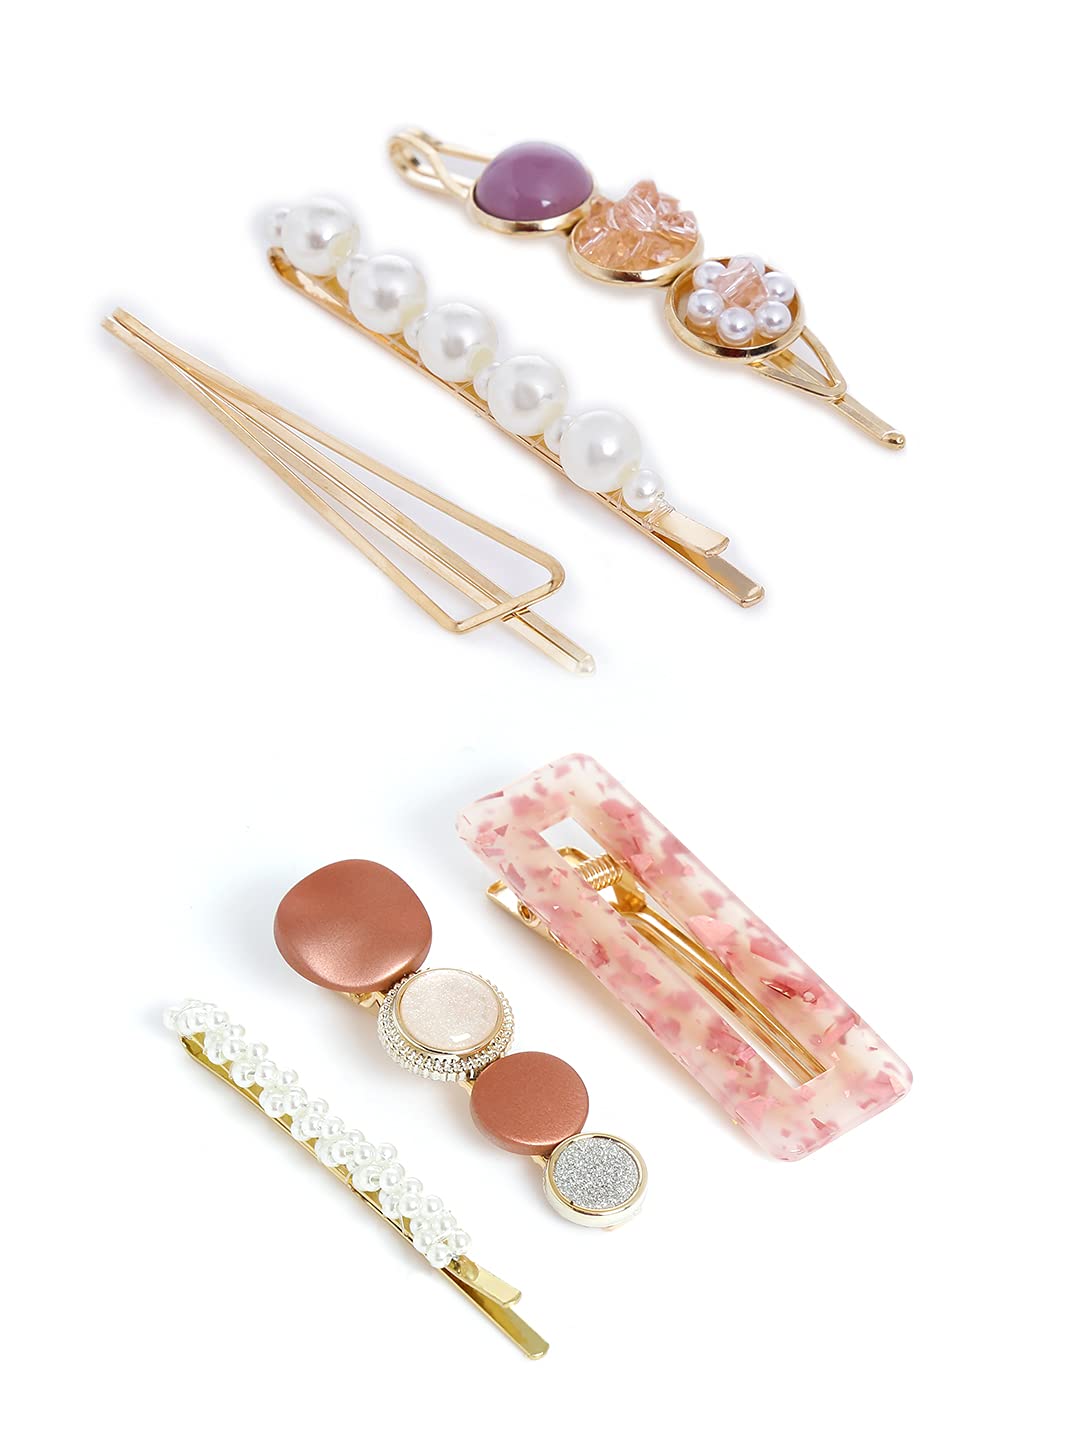 YELLOW CHIMES Women's Pearl Bobby Fashion Hair Pins Accessories (Multicolor) - 6 Pieces